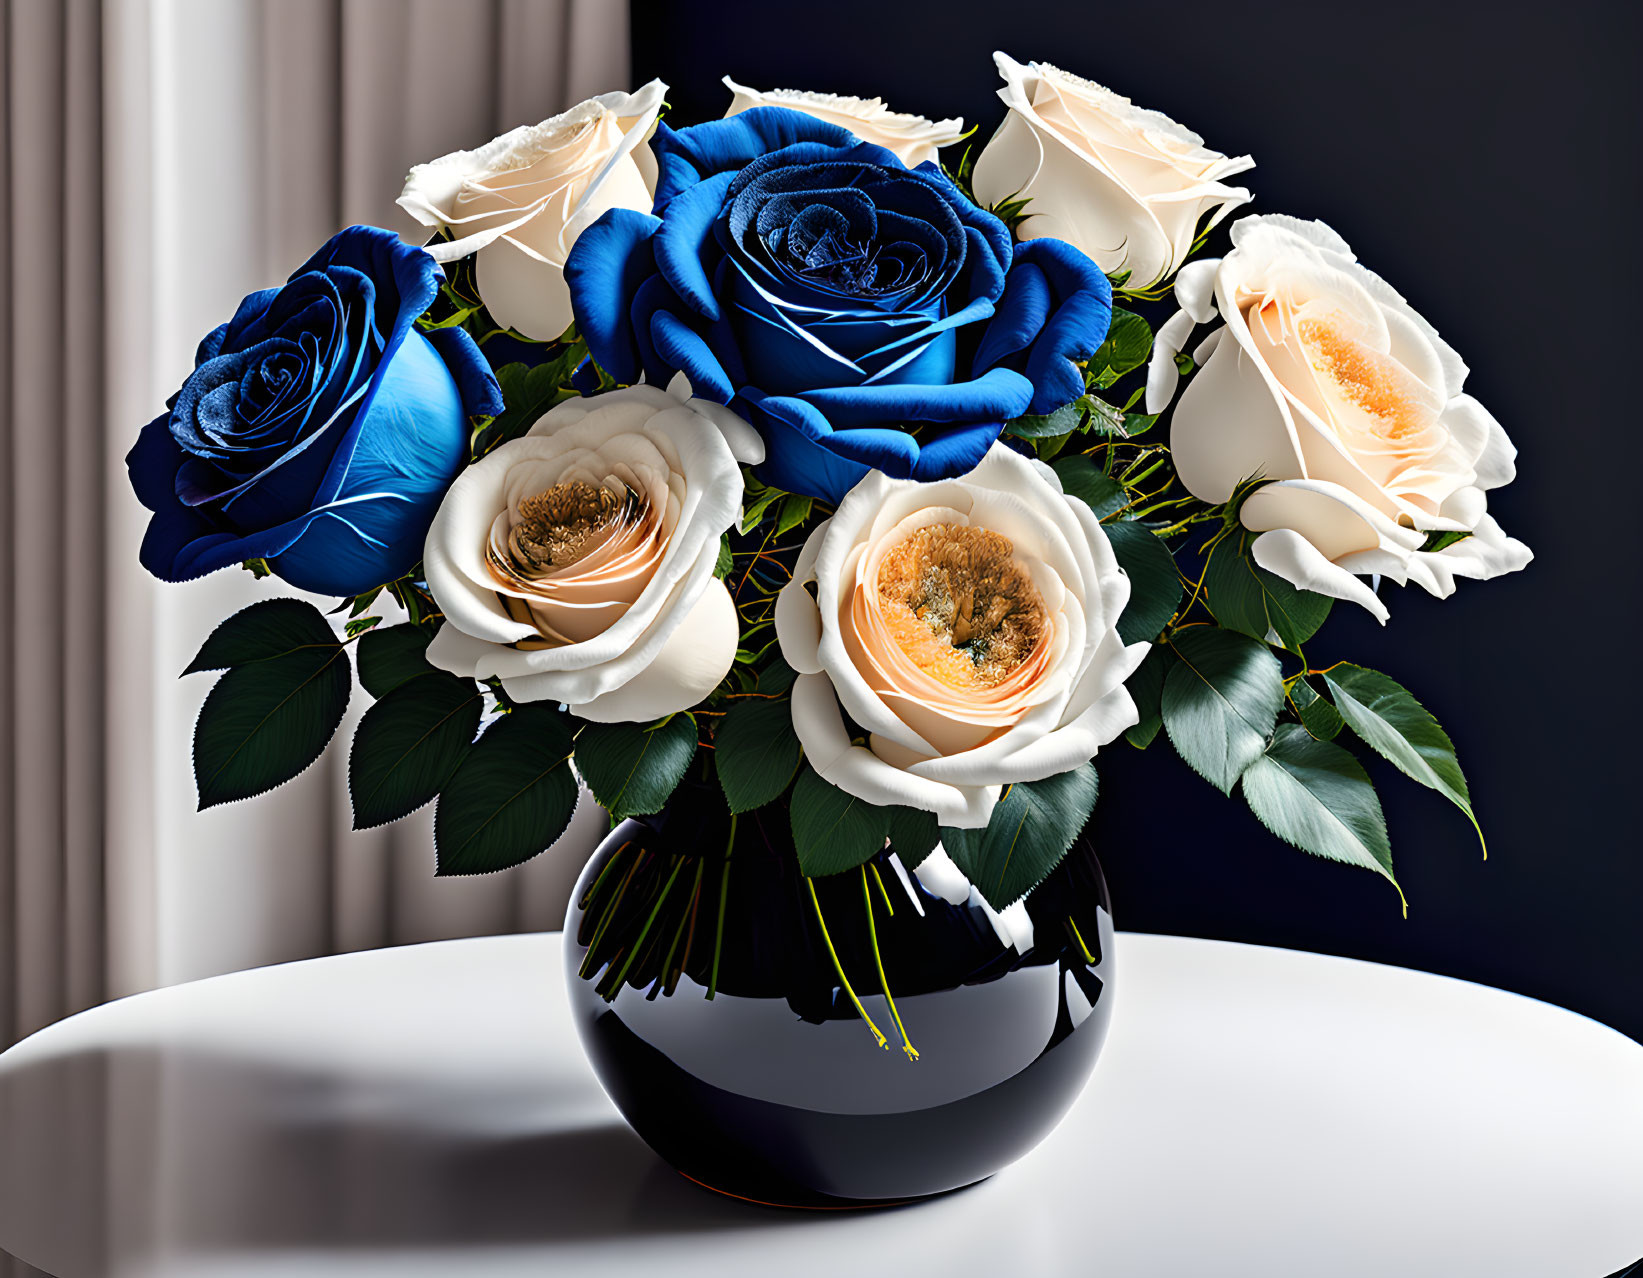 Blue and White Roses Bouquet in Black Vase on Dark Background